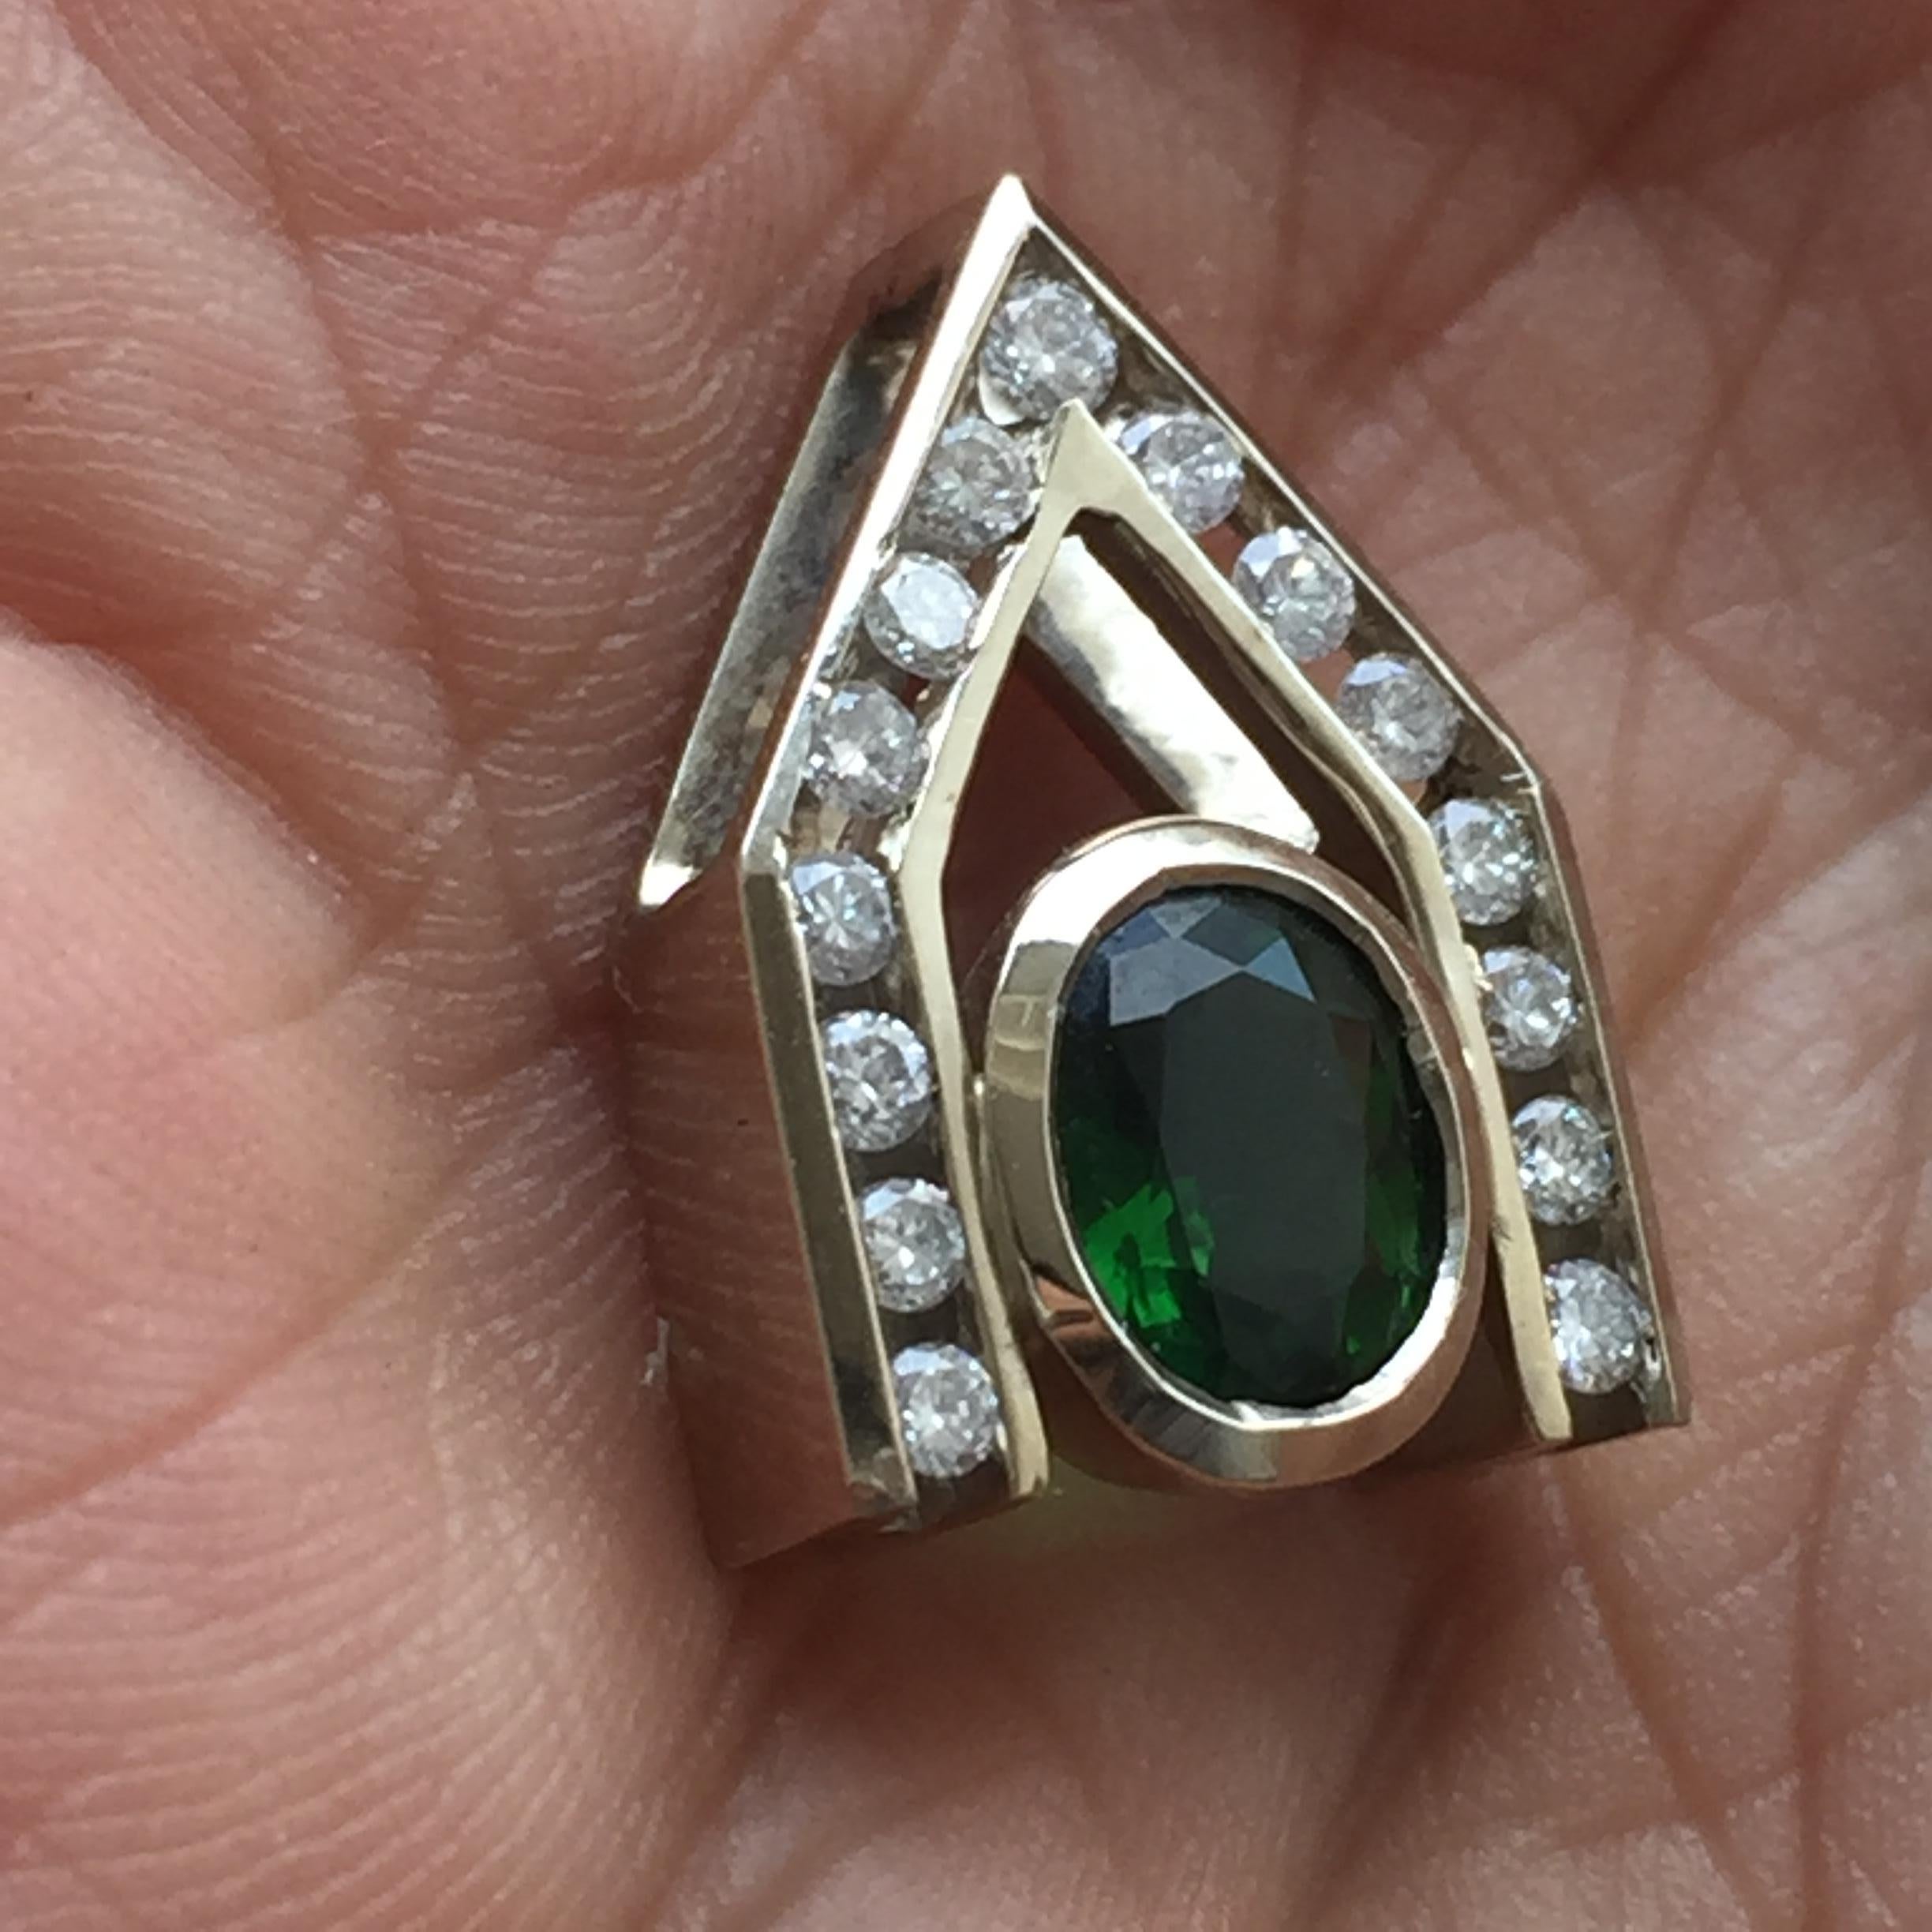 H718002
Ring may have to be made to order depending on finger size , please allow 3 to 6 weeks but if you have a sooner delivery date needed let us know and we will see if we can accommodate you.

0.90 Carat Chrome Tourmaline. Set in a hand designed